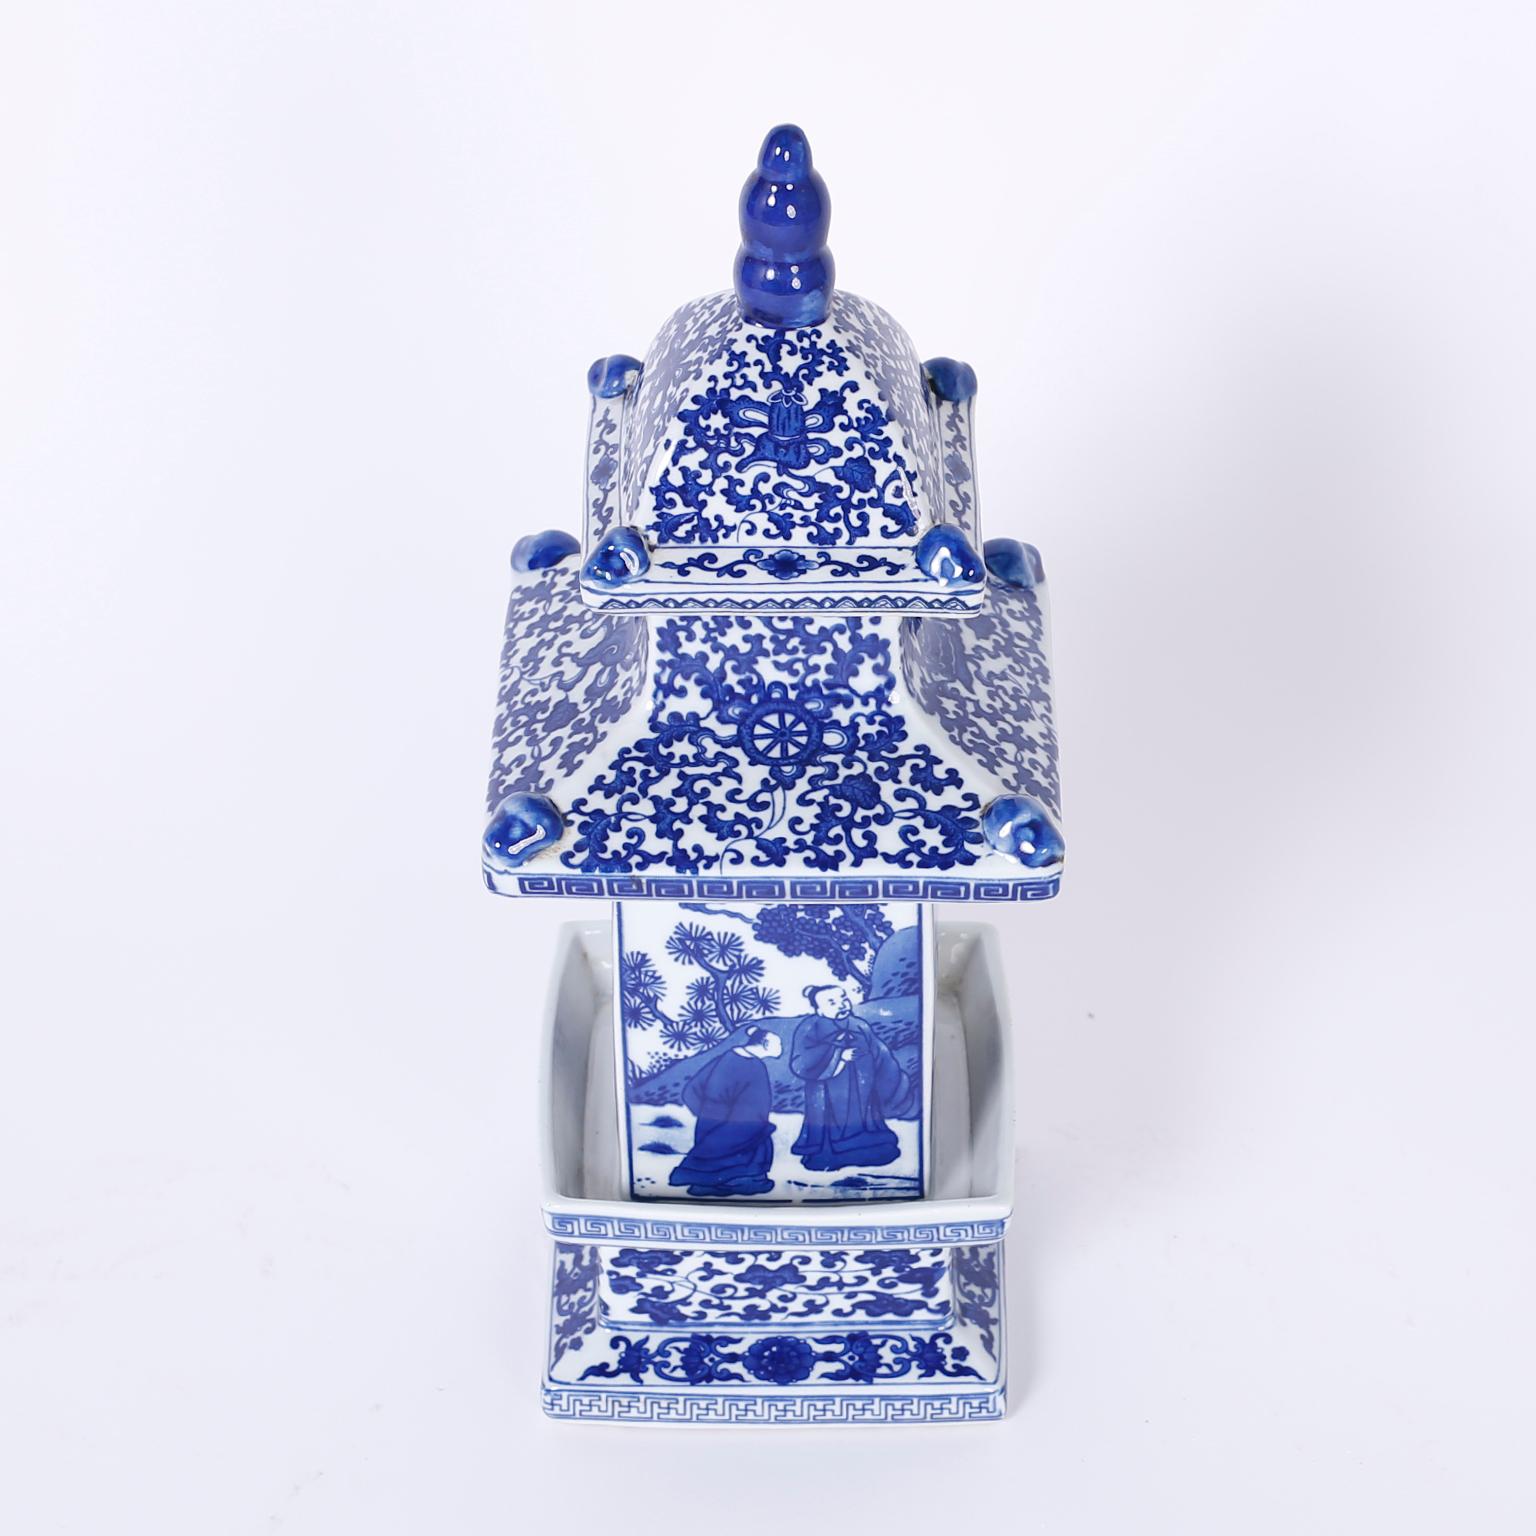 Pair of Blue and White Chinese Porcelain Pagoda Jars or Urns 1